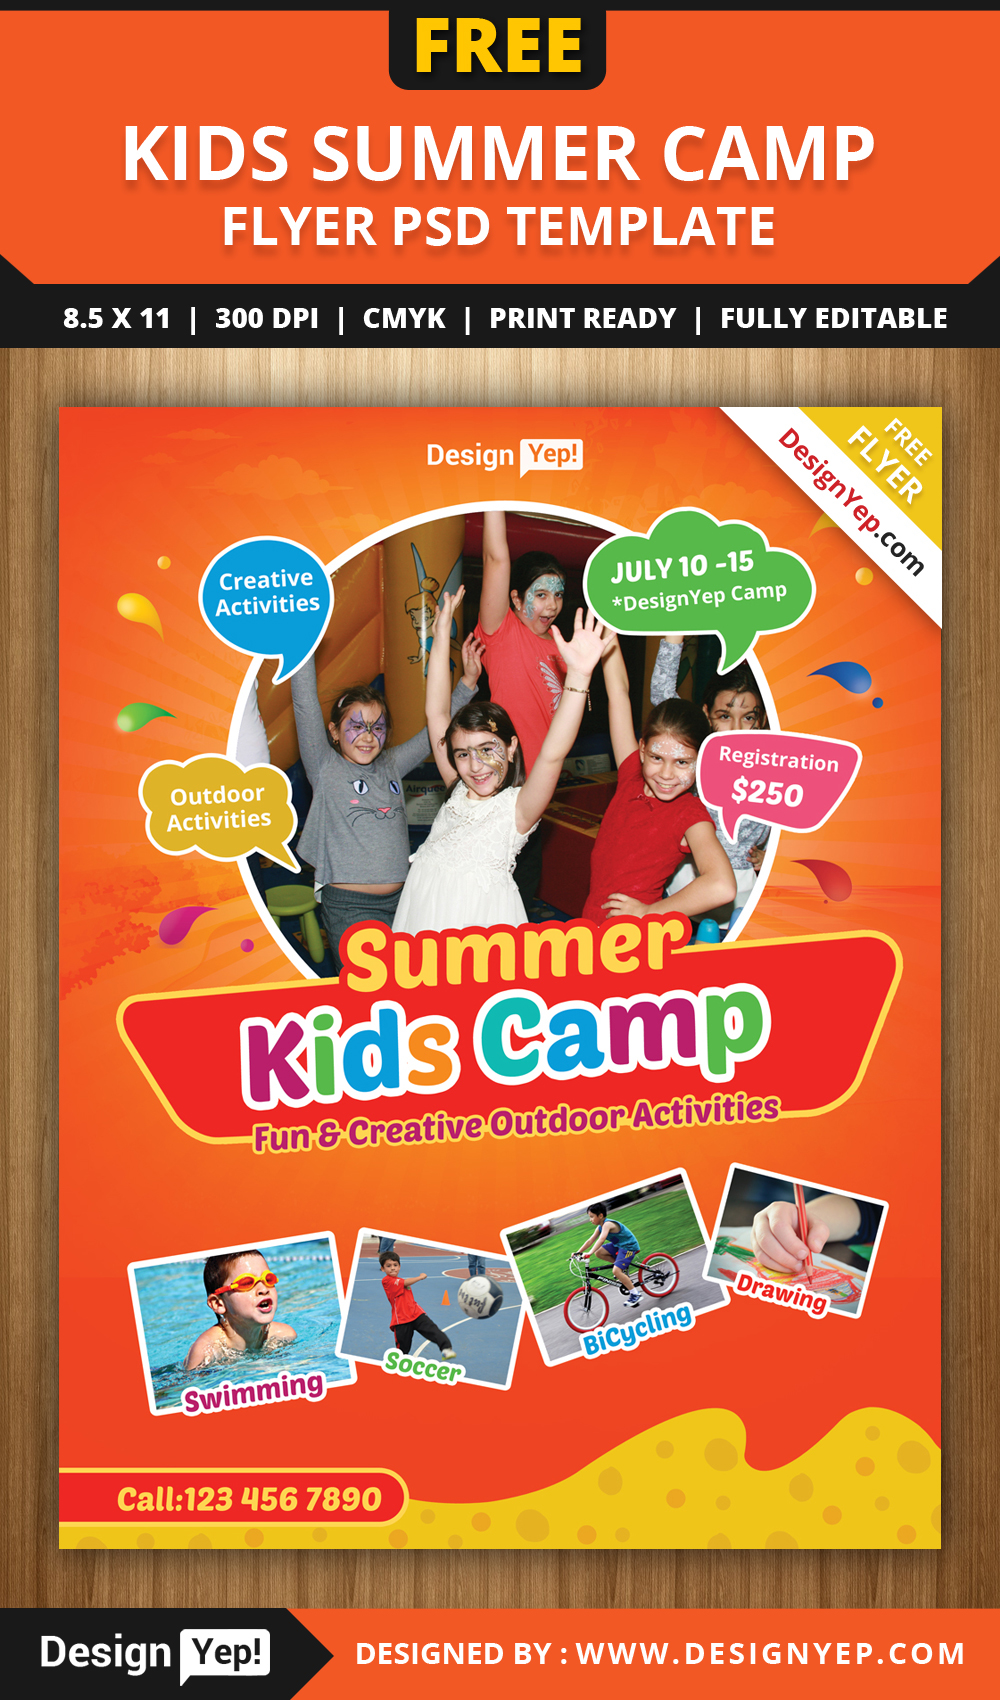 Free Kids Summer Camp Flyer PSD Template on Behance With Summer Camp Brochure Template Free Download